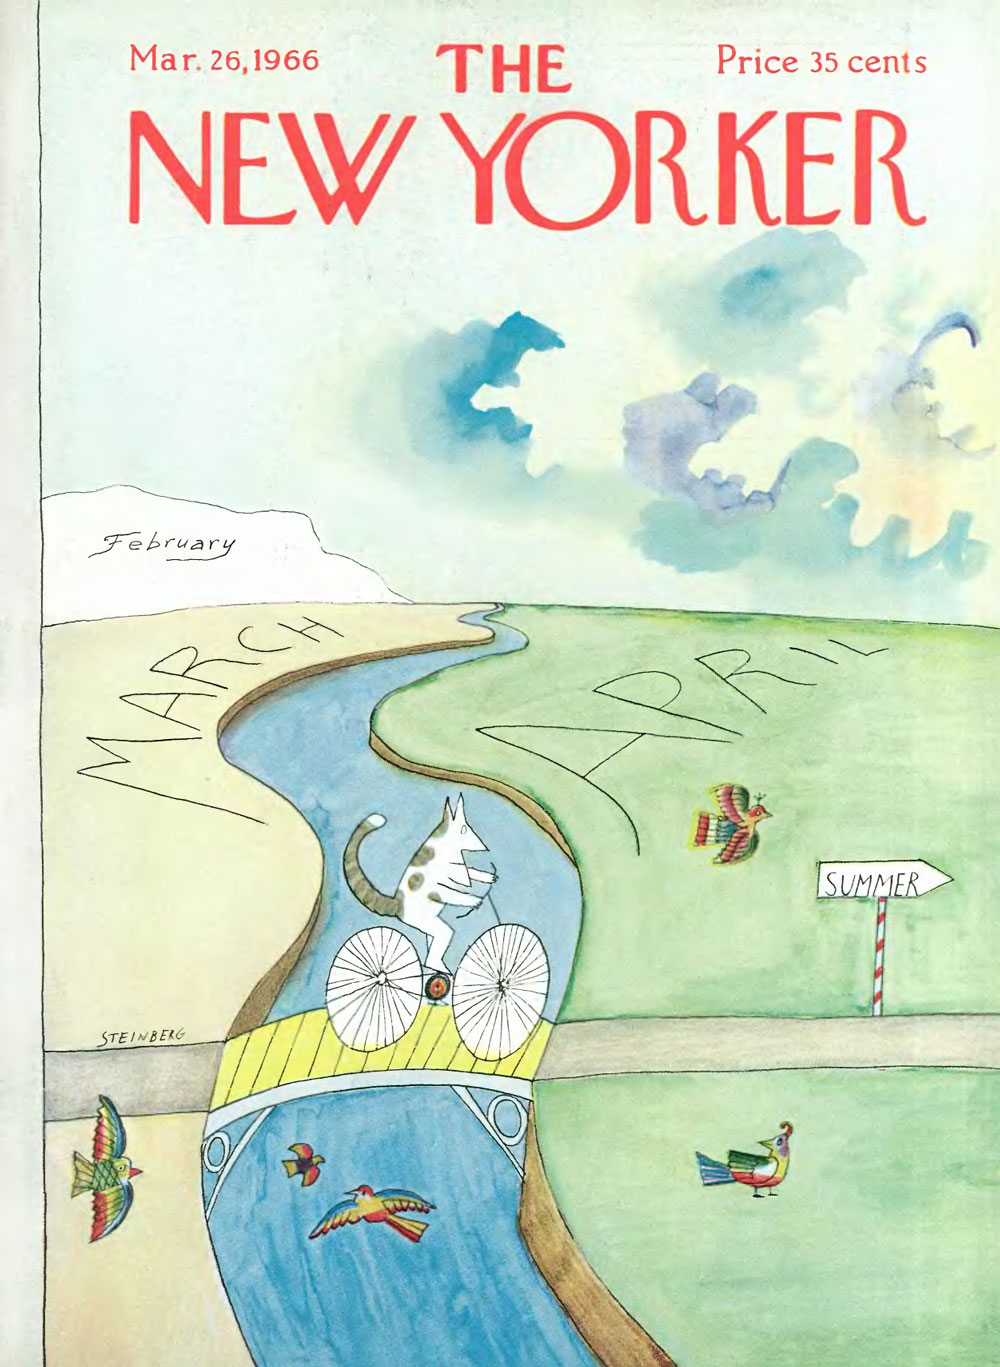 “March to April” by Saul Steinberg, 1966